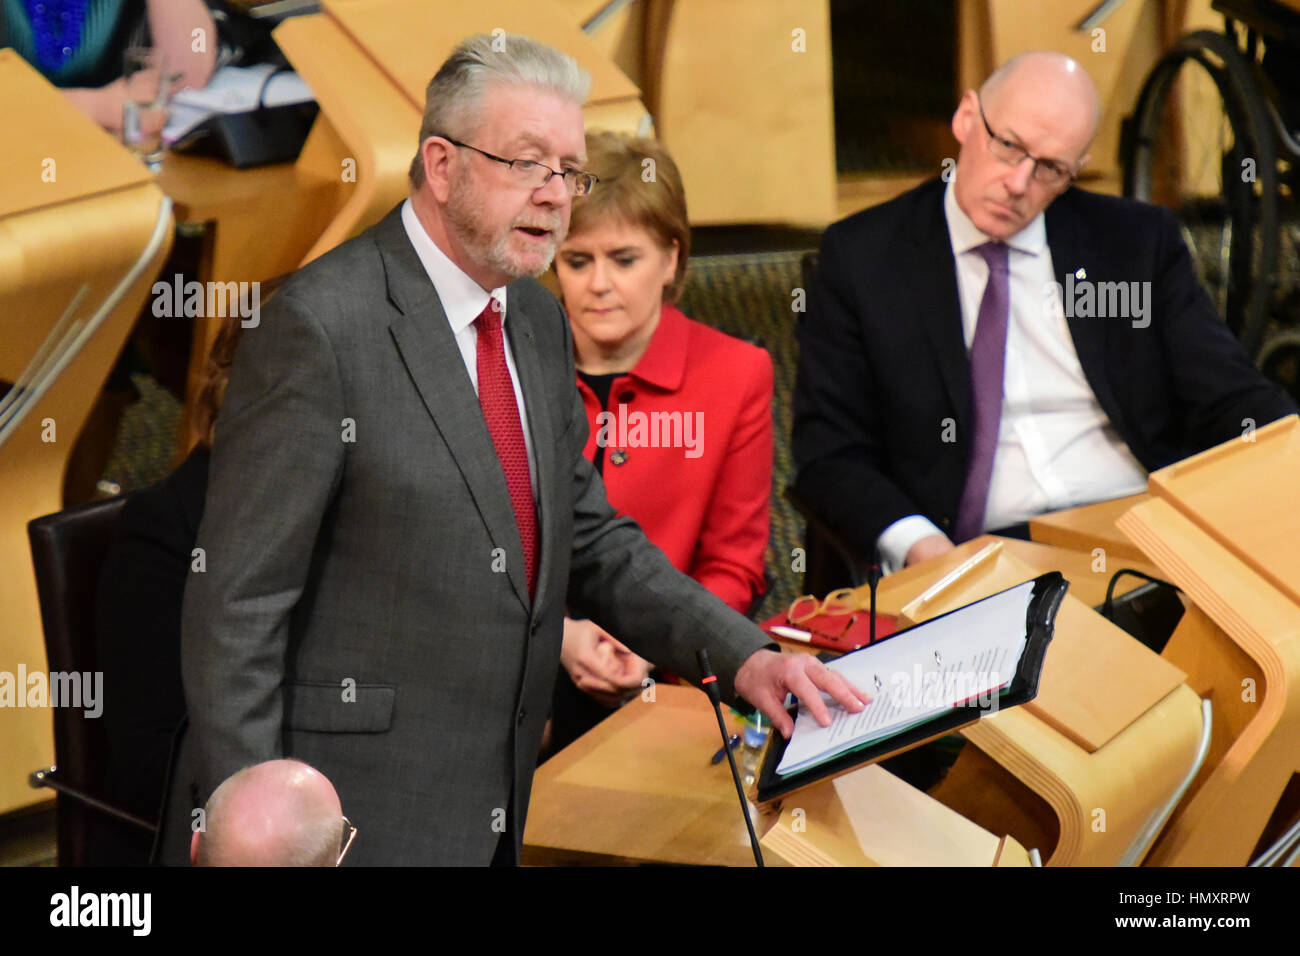 Edinburgh, UK. 7th Feb, 2017. Scottish Brexit Minister Michael Russell (L)introduces a Scottish Government debate in the Scottish Parliament opposing the triggering of Article 50, as First Minister Nicola Sturgeon looks on, Credit: Ken Jack/Alamy Live News Stock Photo